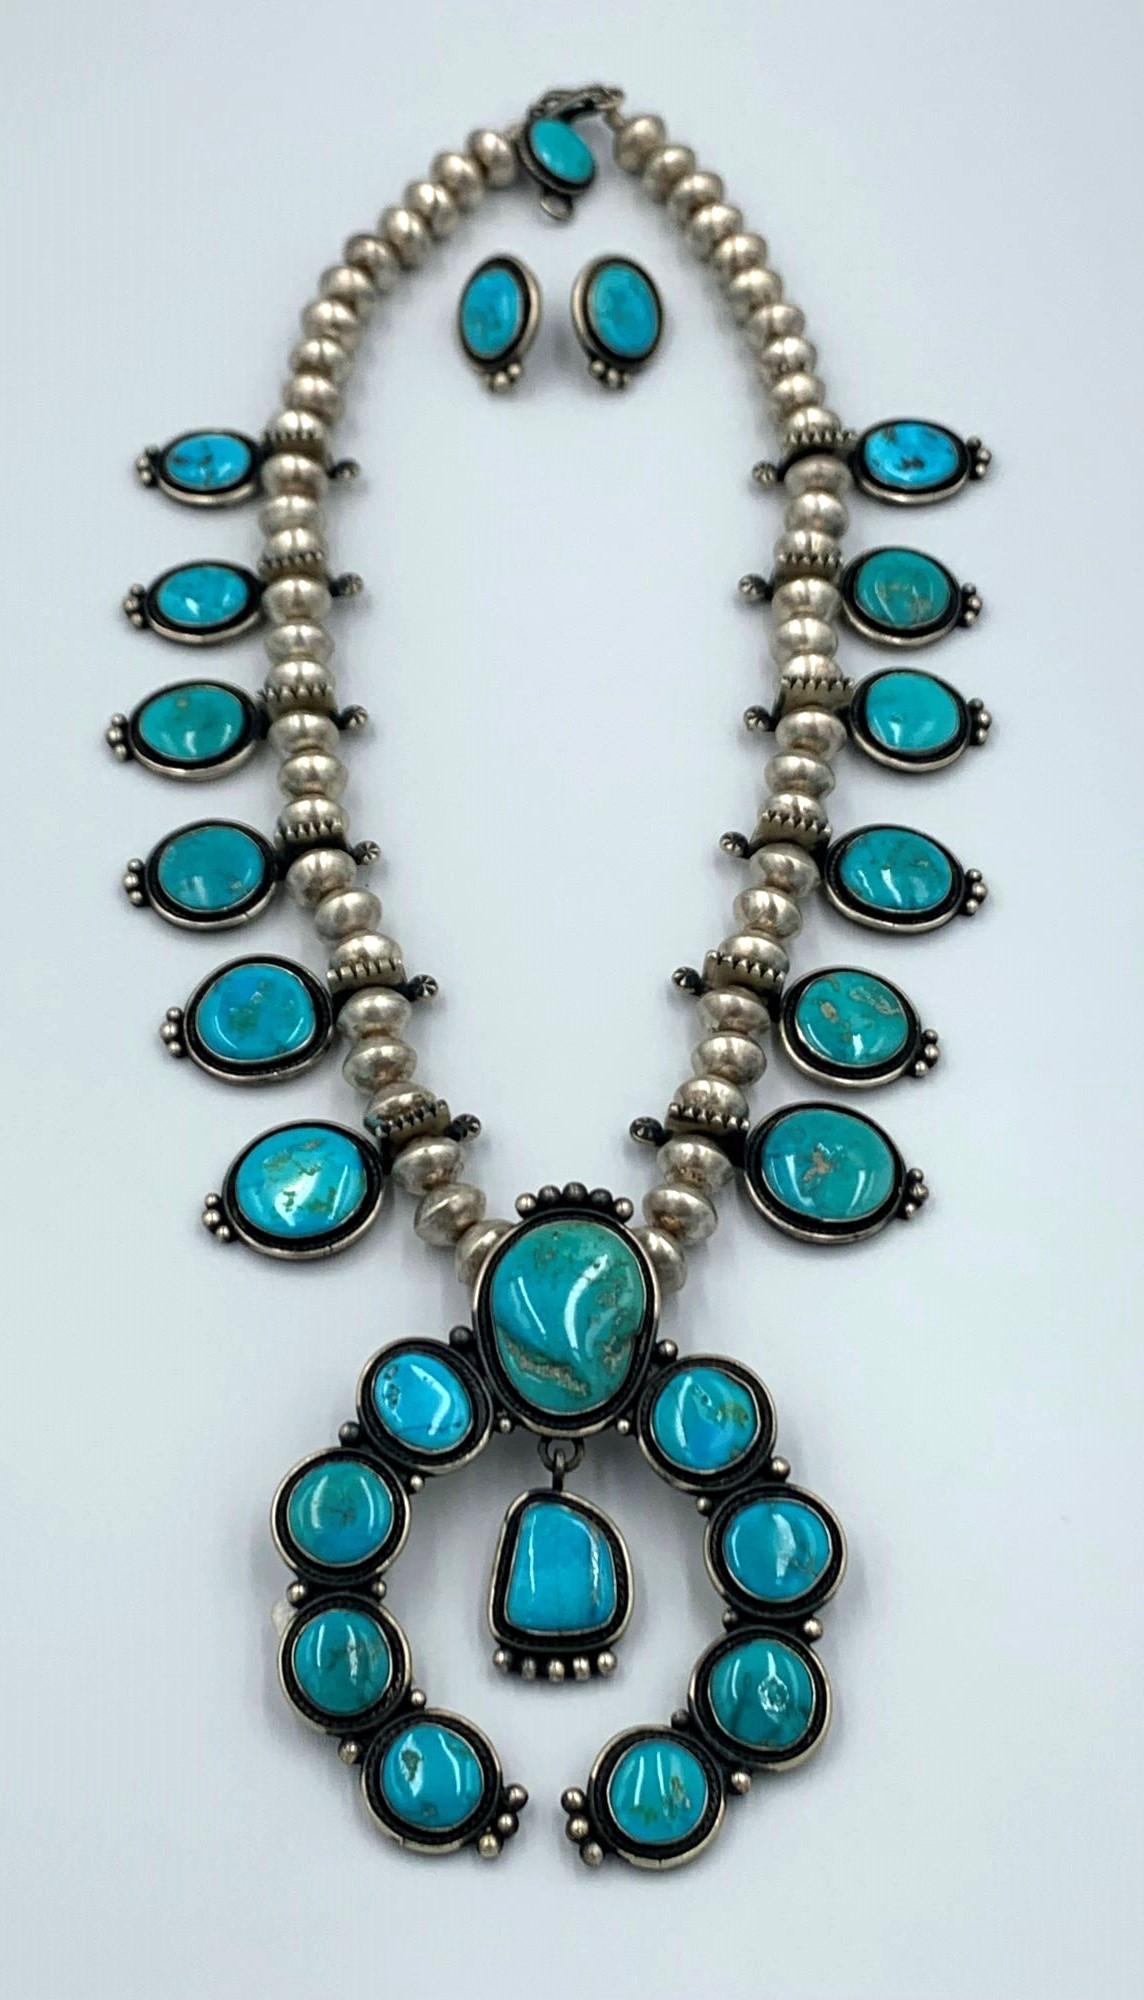 Squash Blossom Necklace Earrings Set by Navajo Silversmith Tommy Jackson In New Condition For Sale In Scottsdale, AZ